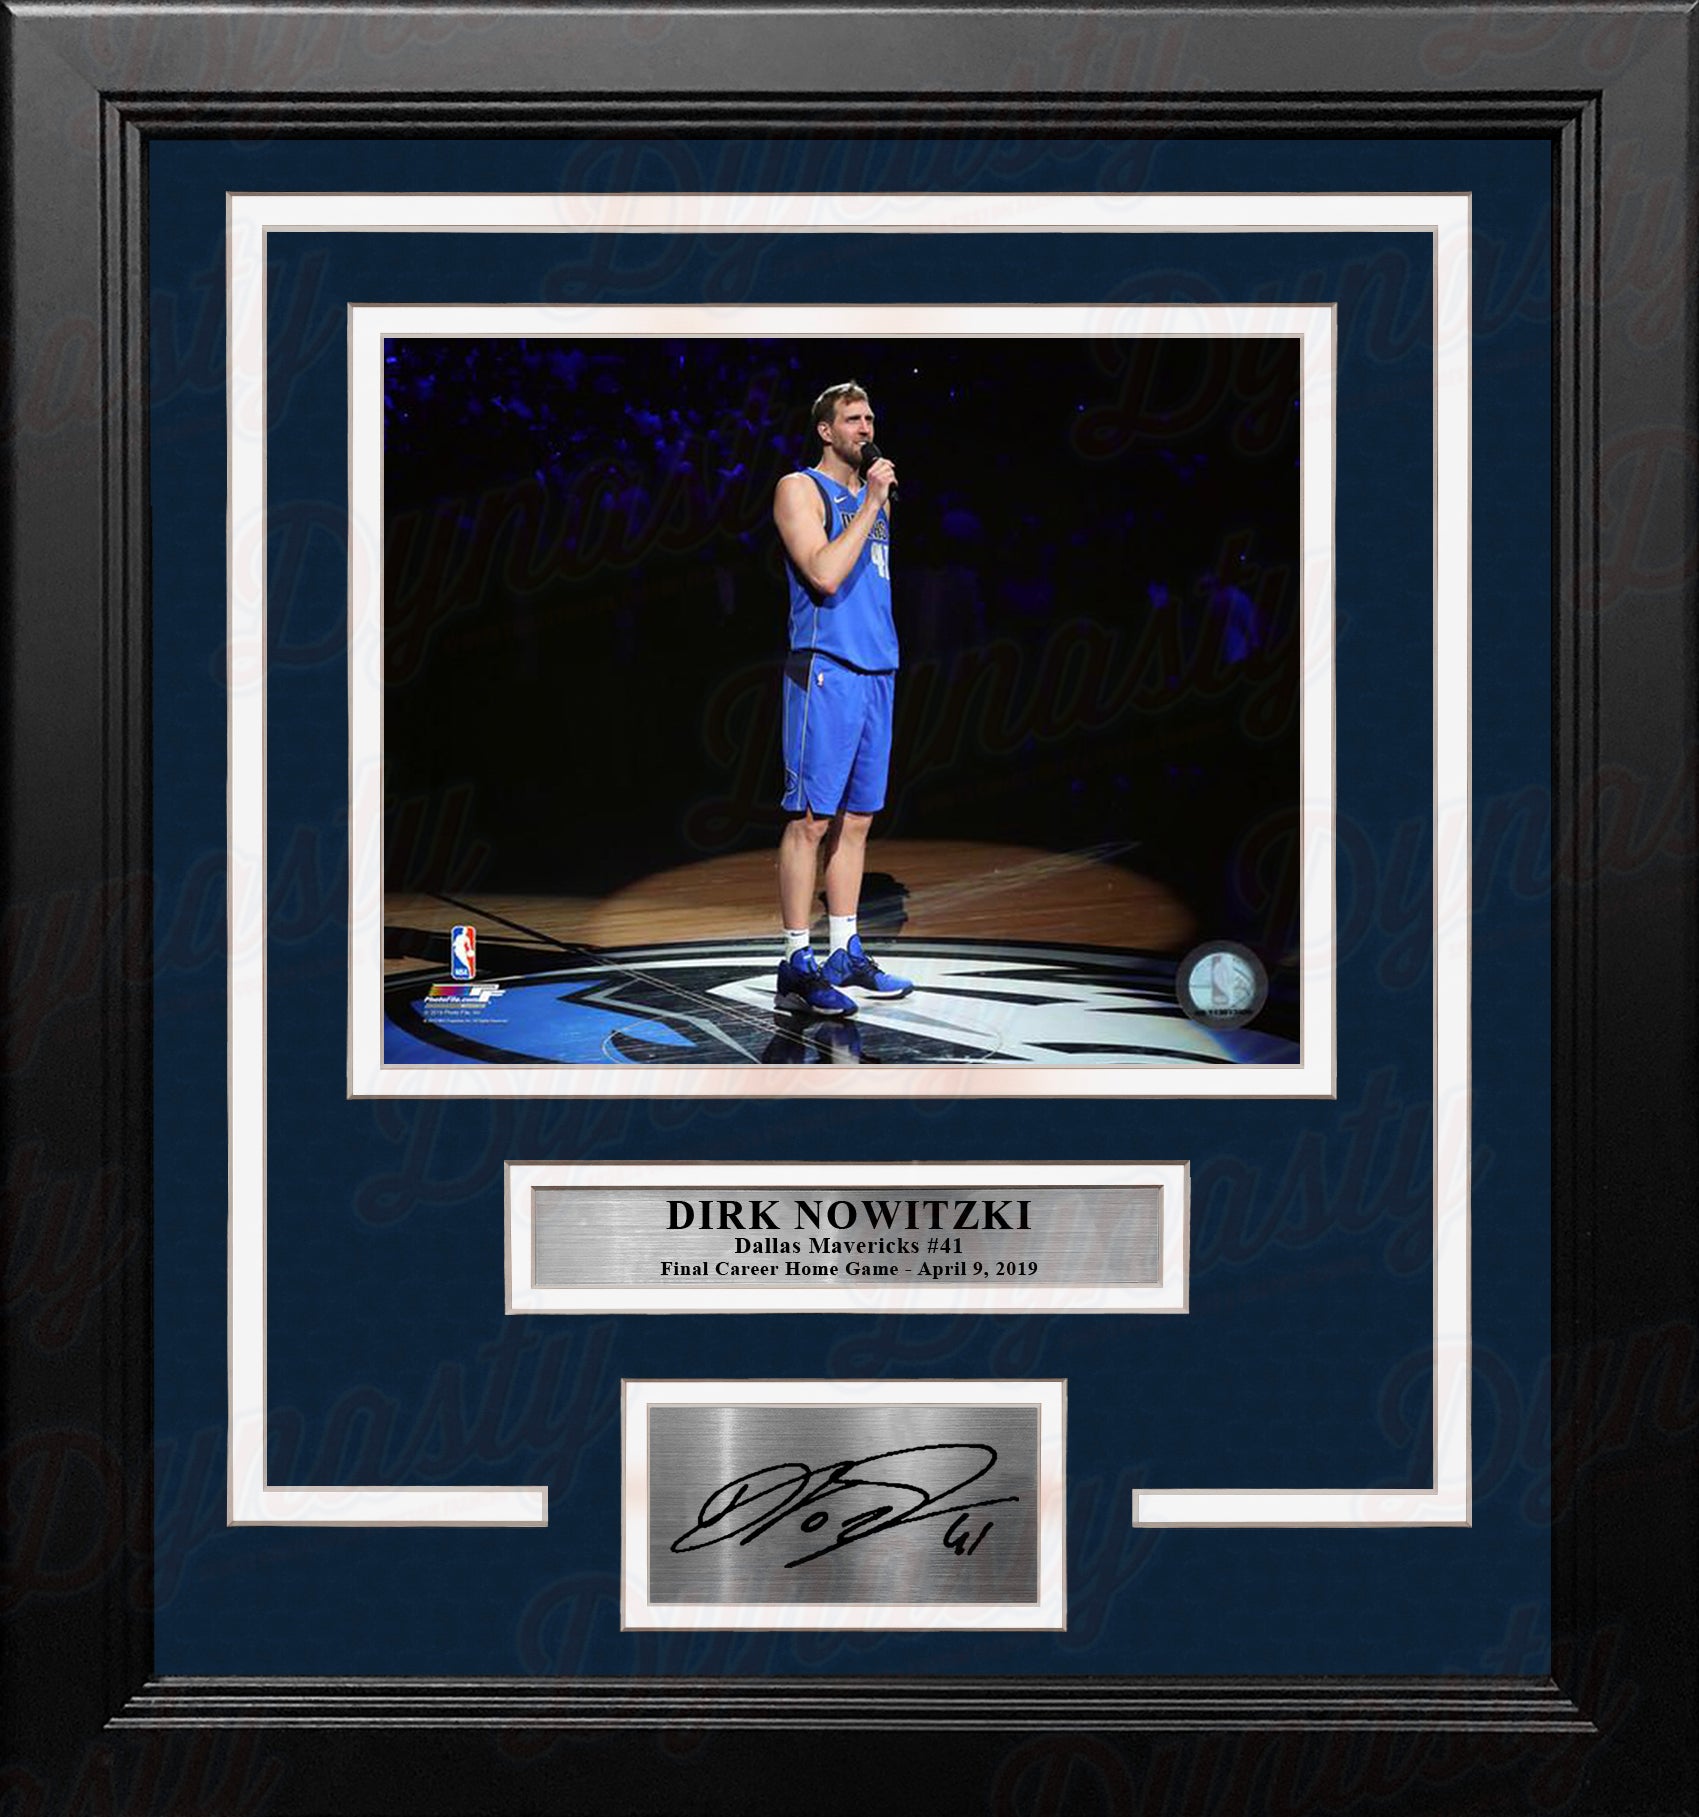 Dirk Nowitzki Dallas Mavericks Final Home Game 8x10 Framed Basketball Photo with Engraved Autograph - Dynasty Sports & Framing 